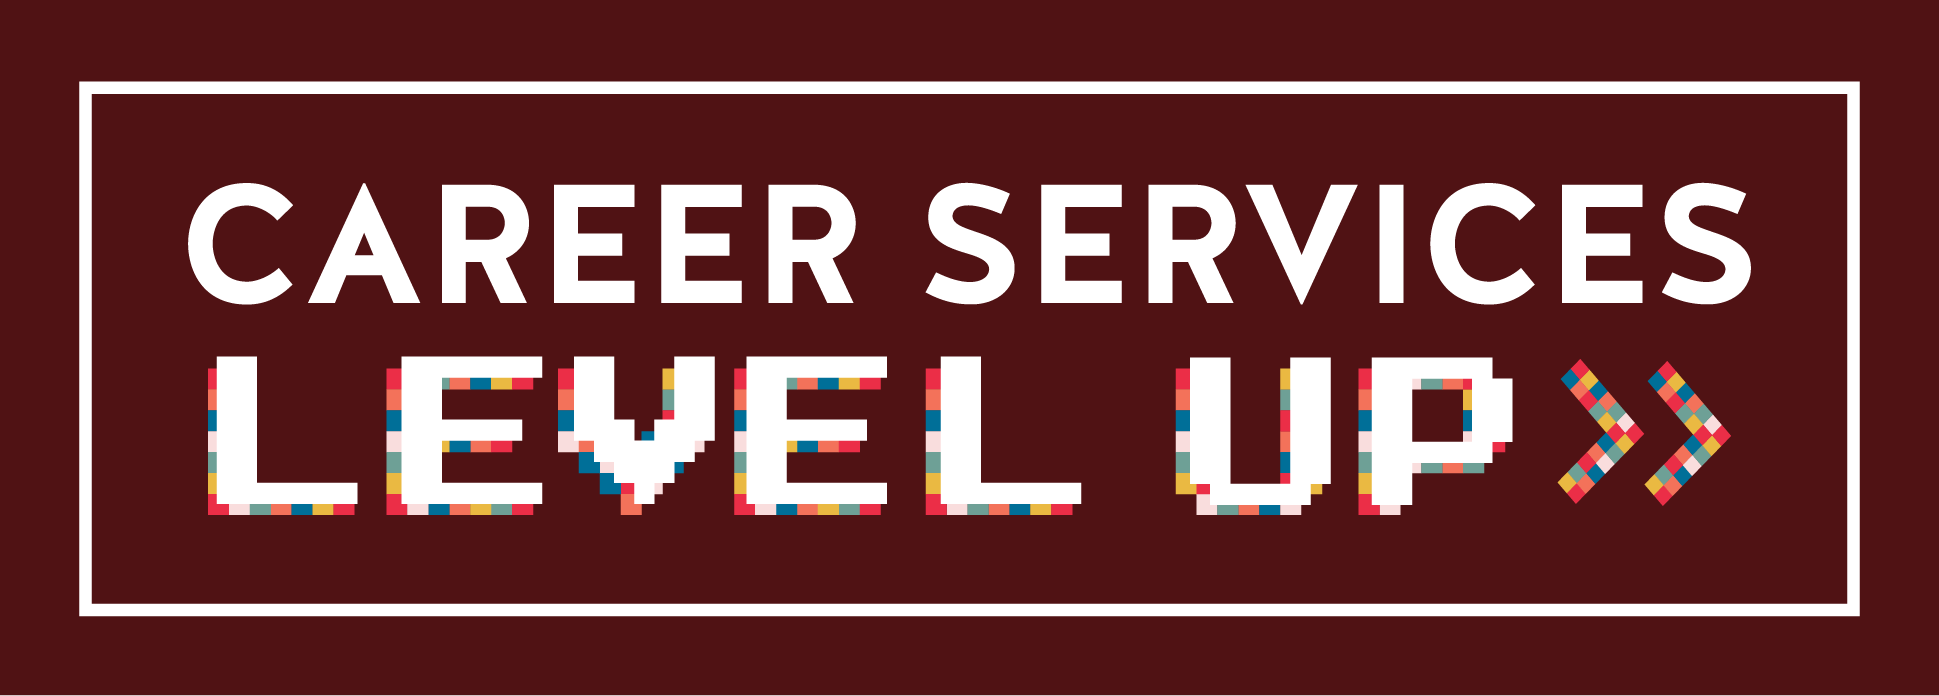 Career services level up logo